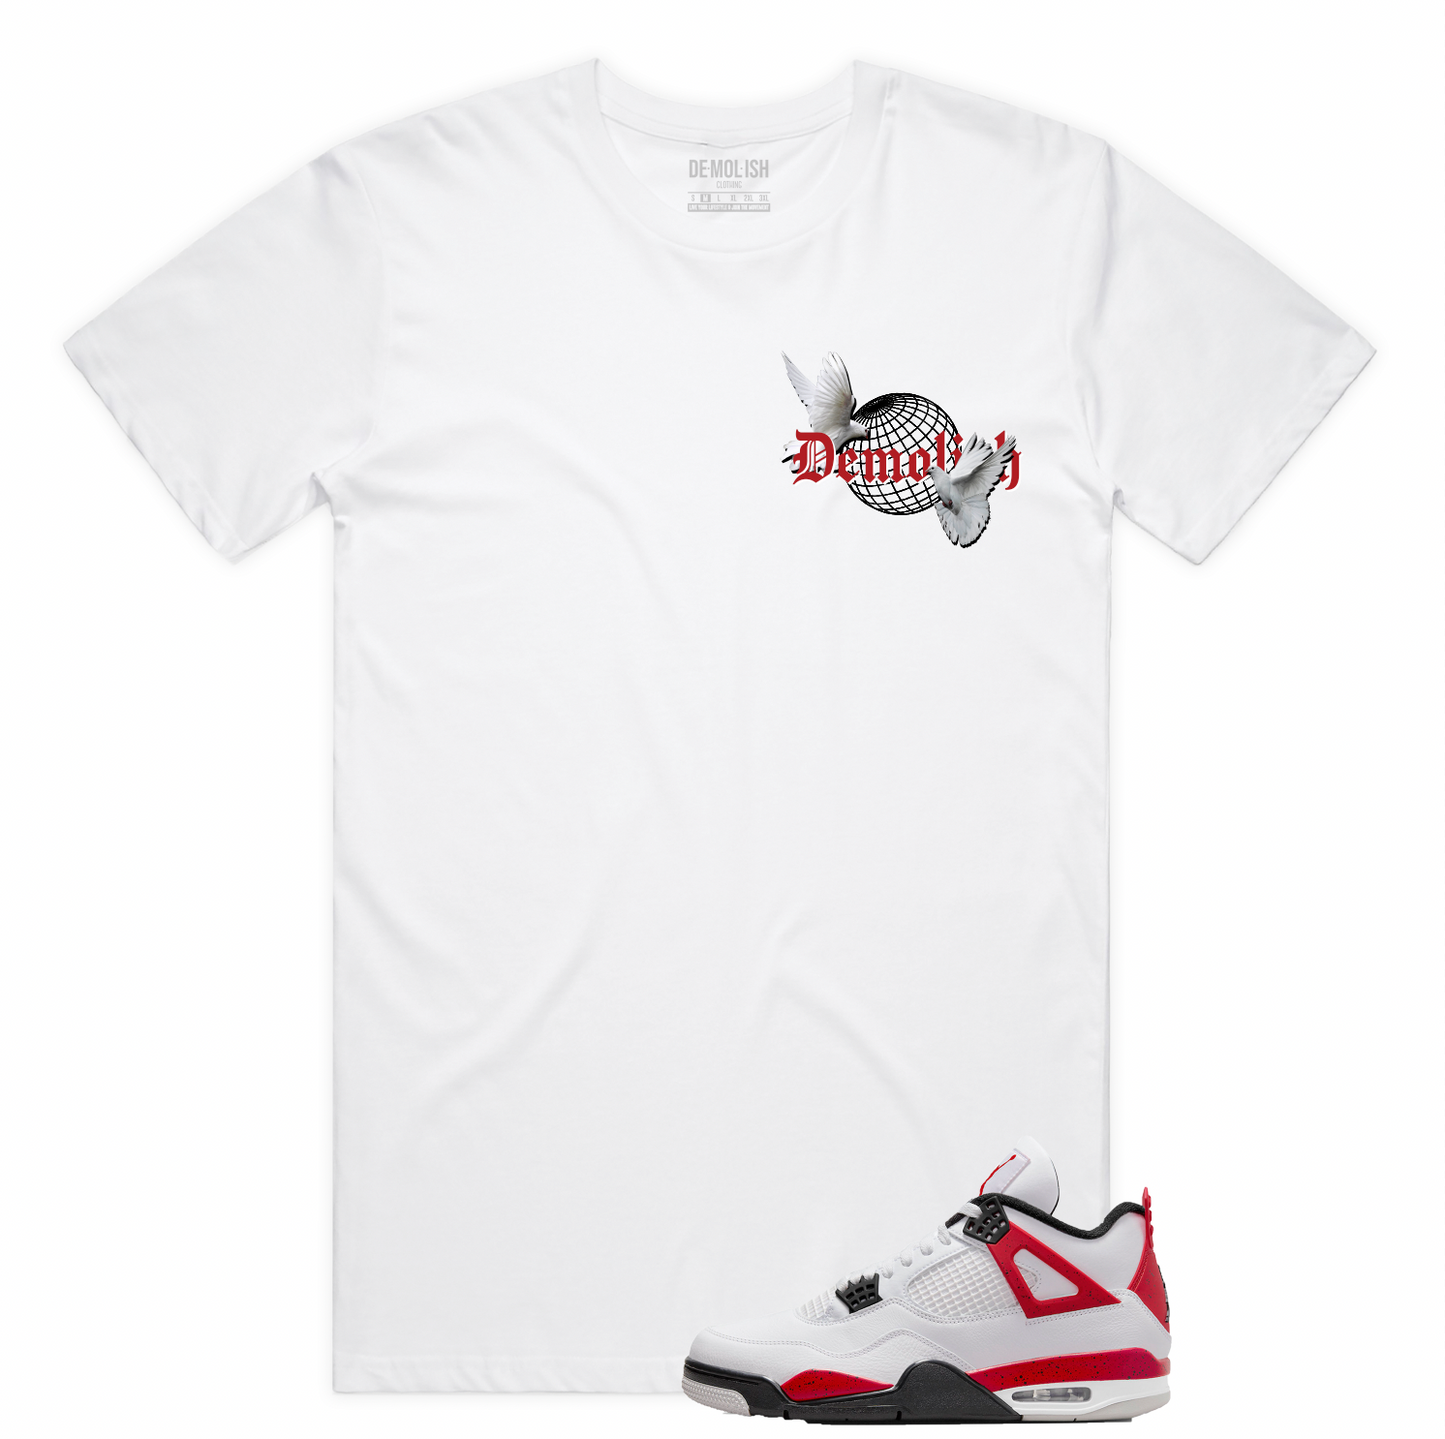 Dream By Any Means Tee (Wte/Red/Blk)